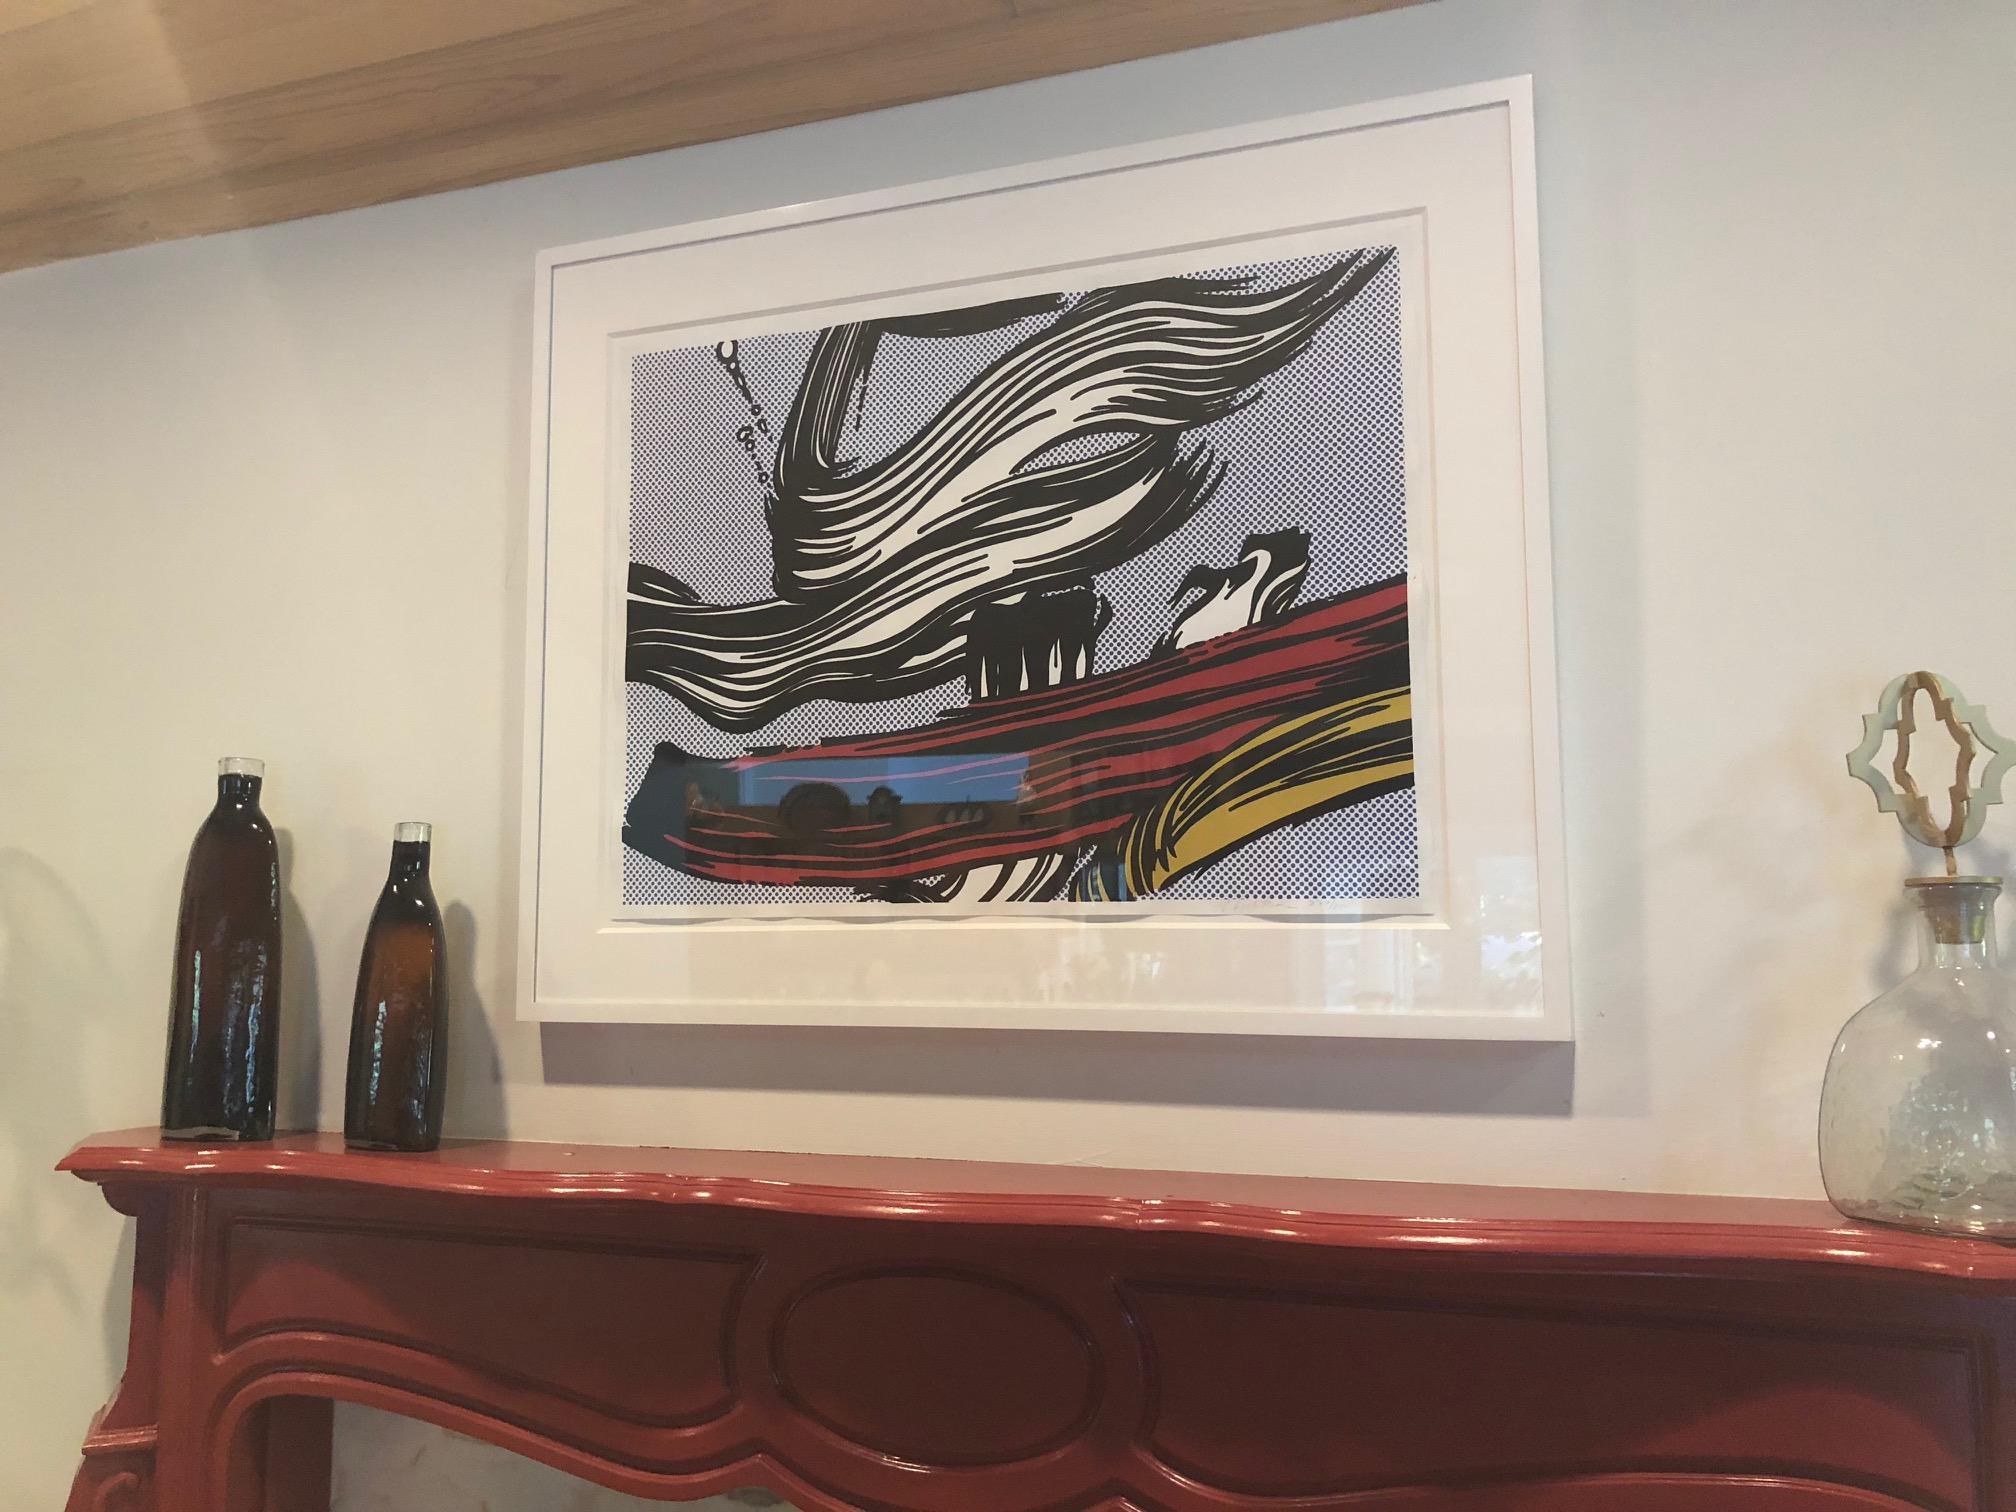 Hand signed rf Lichtenstein in pencil and numbered. Published by Leo Castelli Gallery, for the Pasadena Art Museum, California. The Prints of Roy Lichtenstein A Catalogue Raisonne 1948-1997 Corlett 45.  Screenprint on off-white wove paper framed in